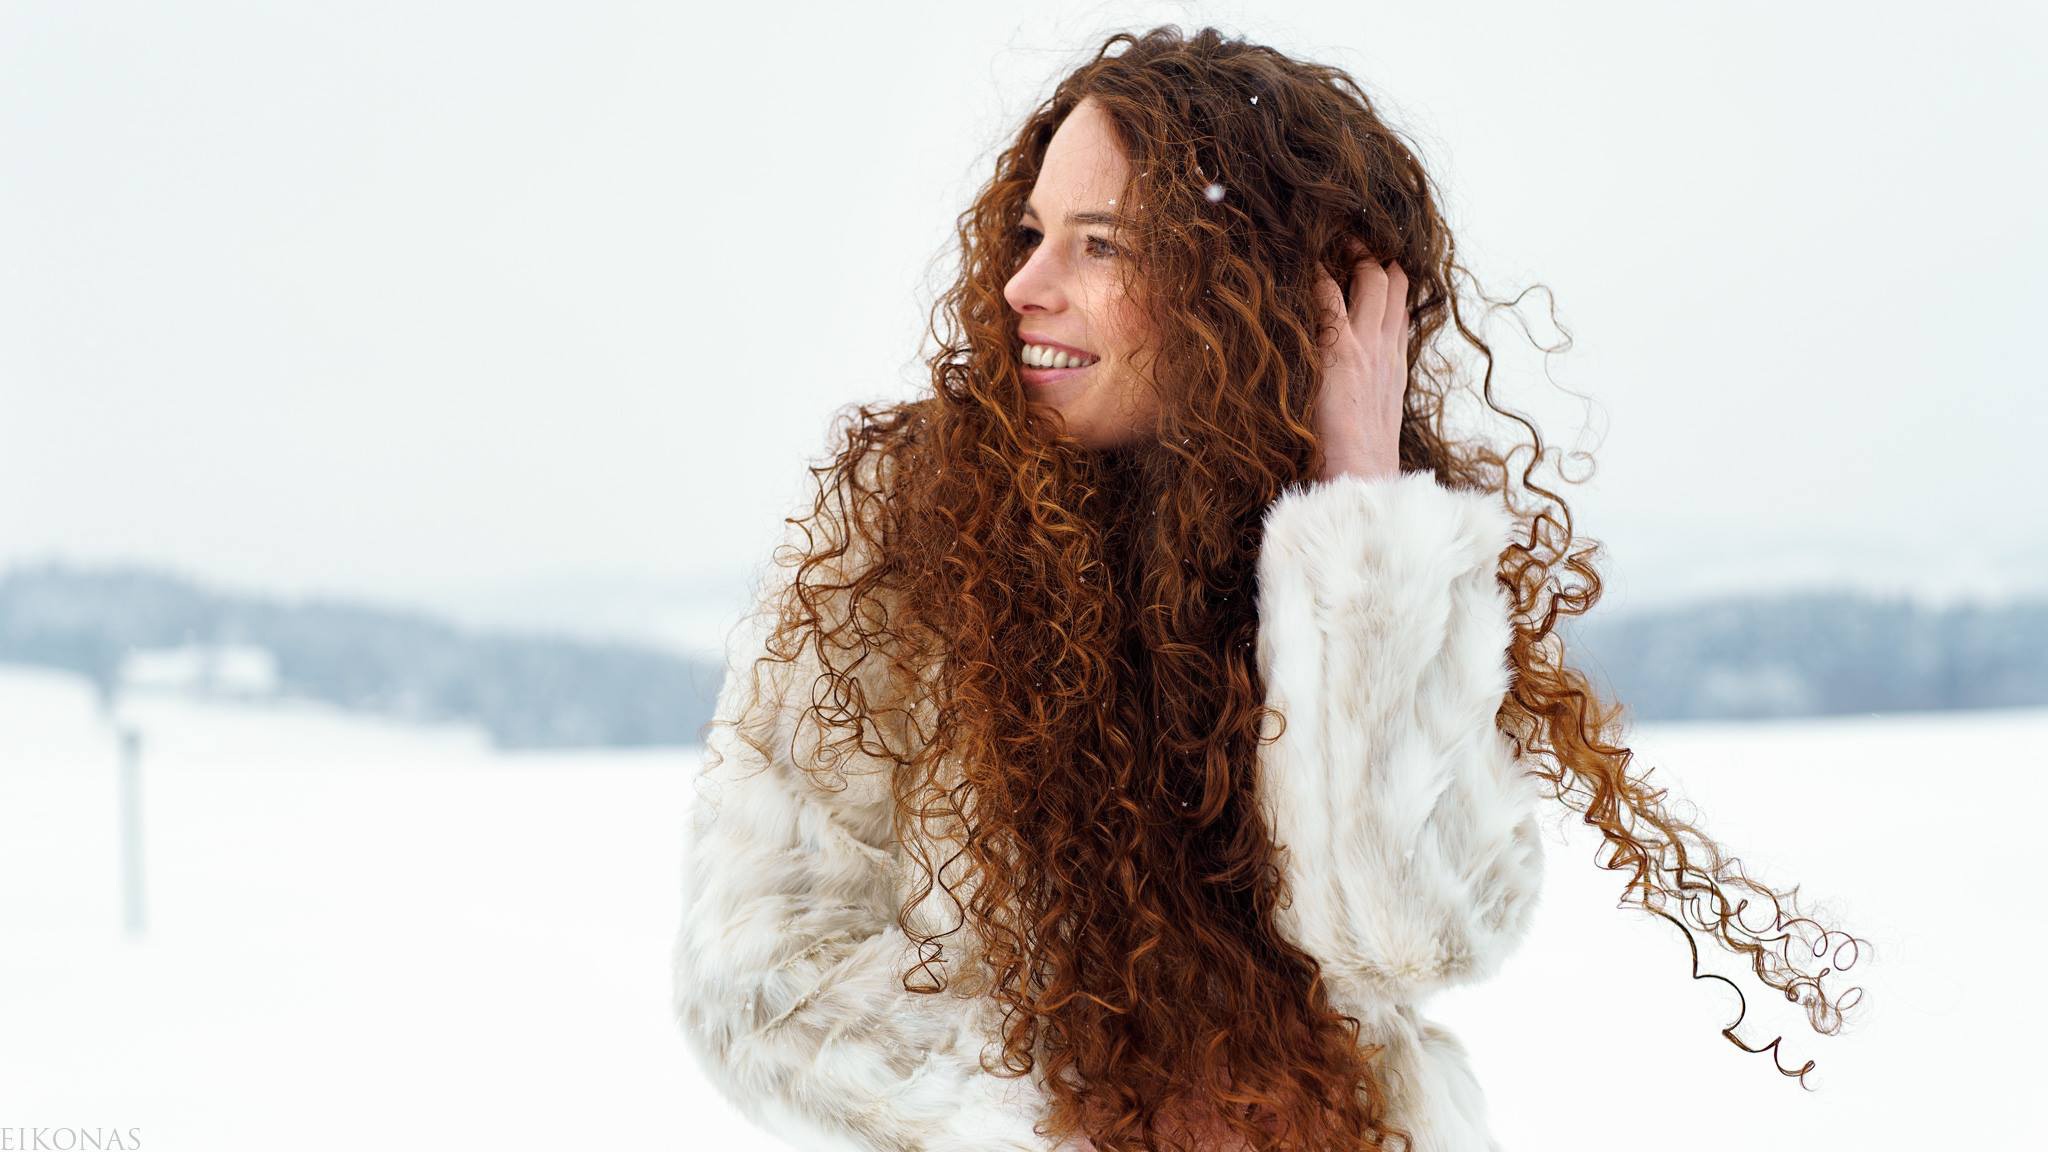 Women Redhead Smiling Looking Into The Distance Long Hair Winter Snow Hands In Hair Women Outdoors O 2048x1152